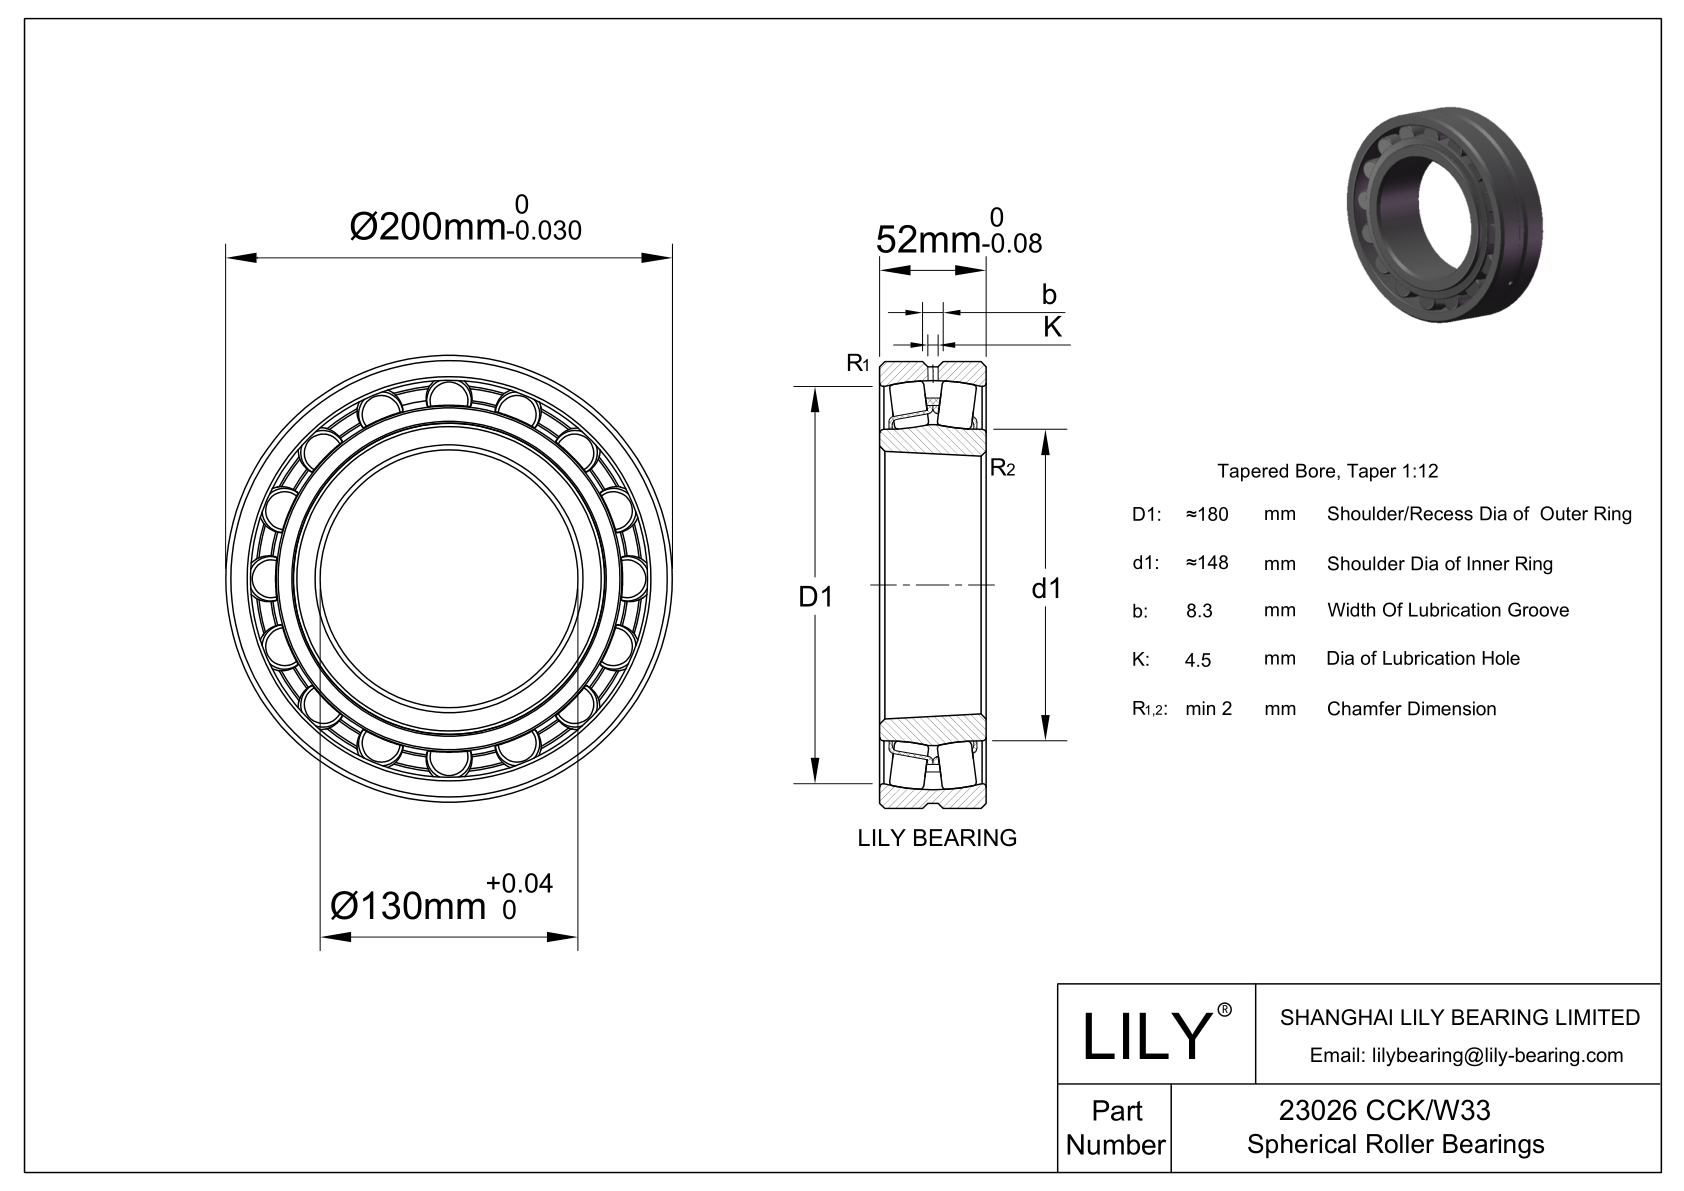 23026 CCK/W33 Double Row Spherical Roller Bearing cad drawing